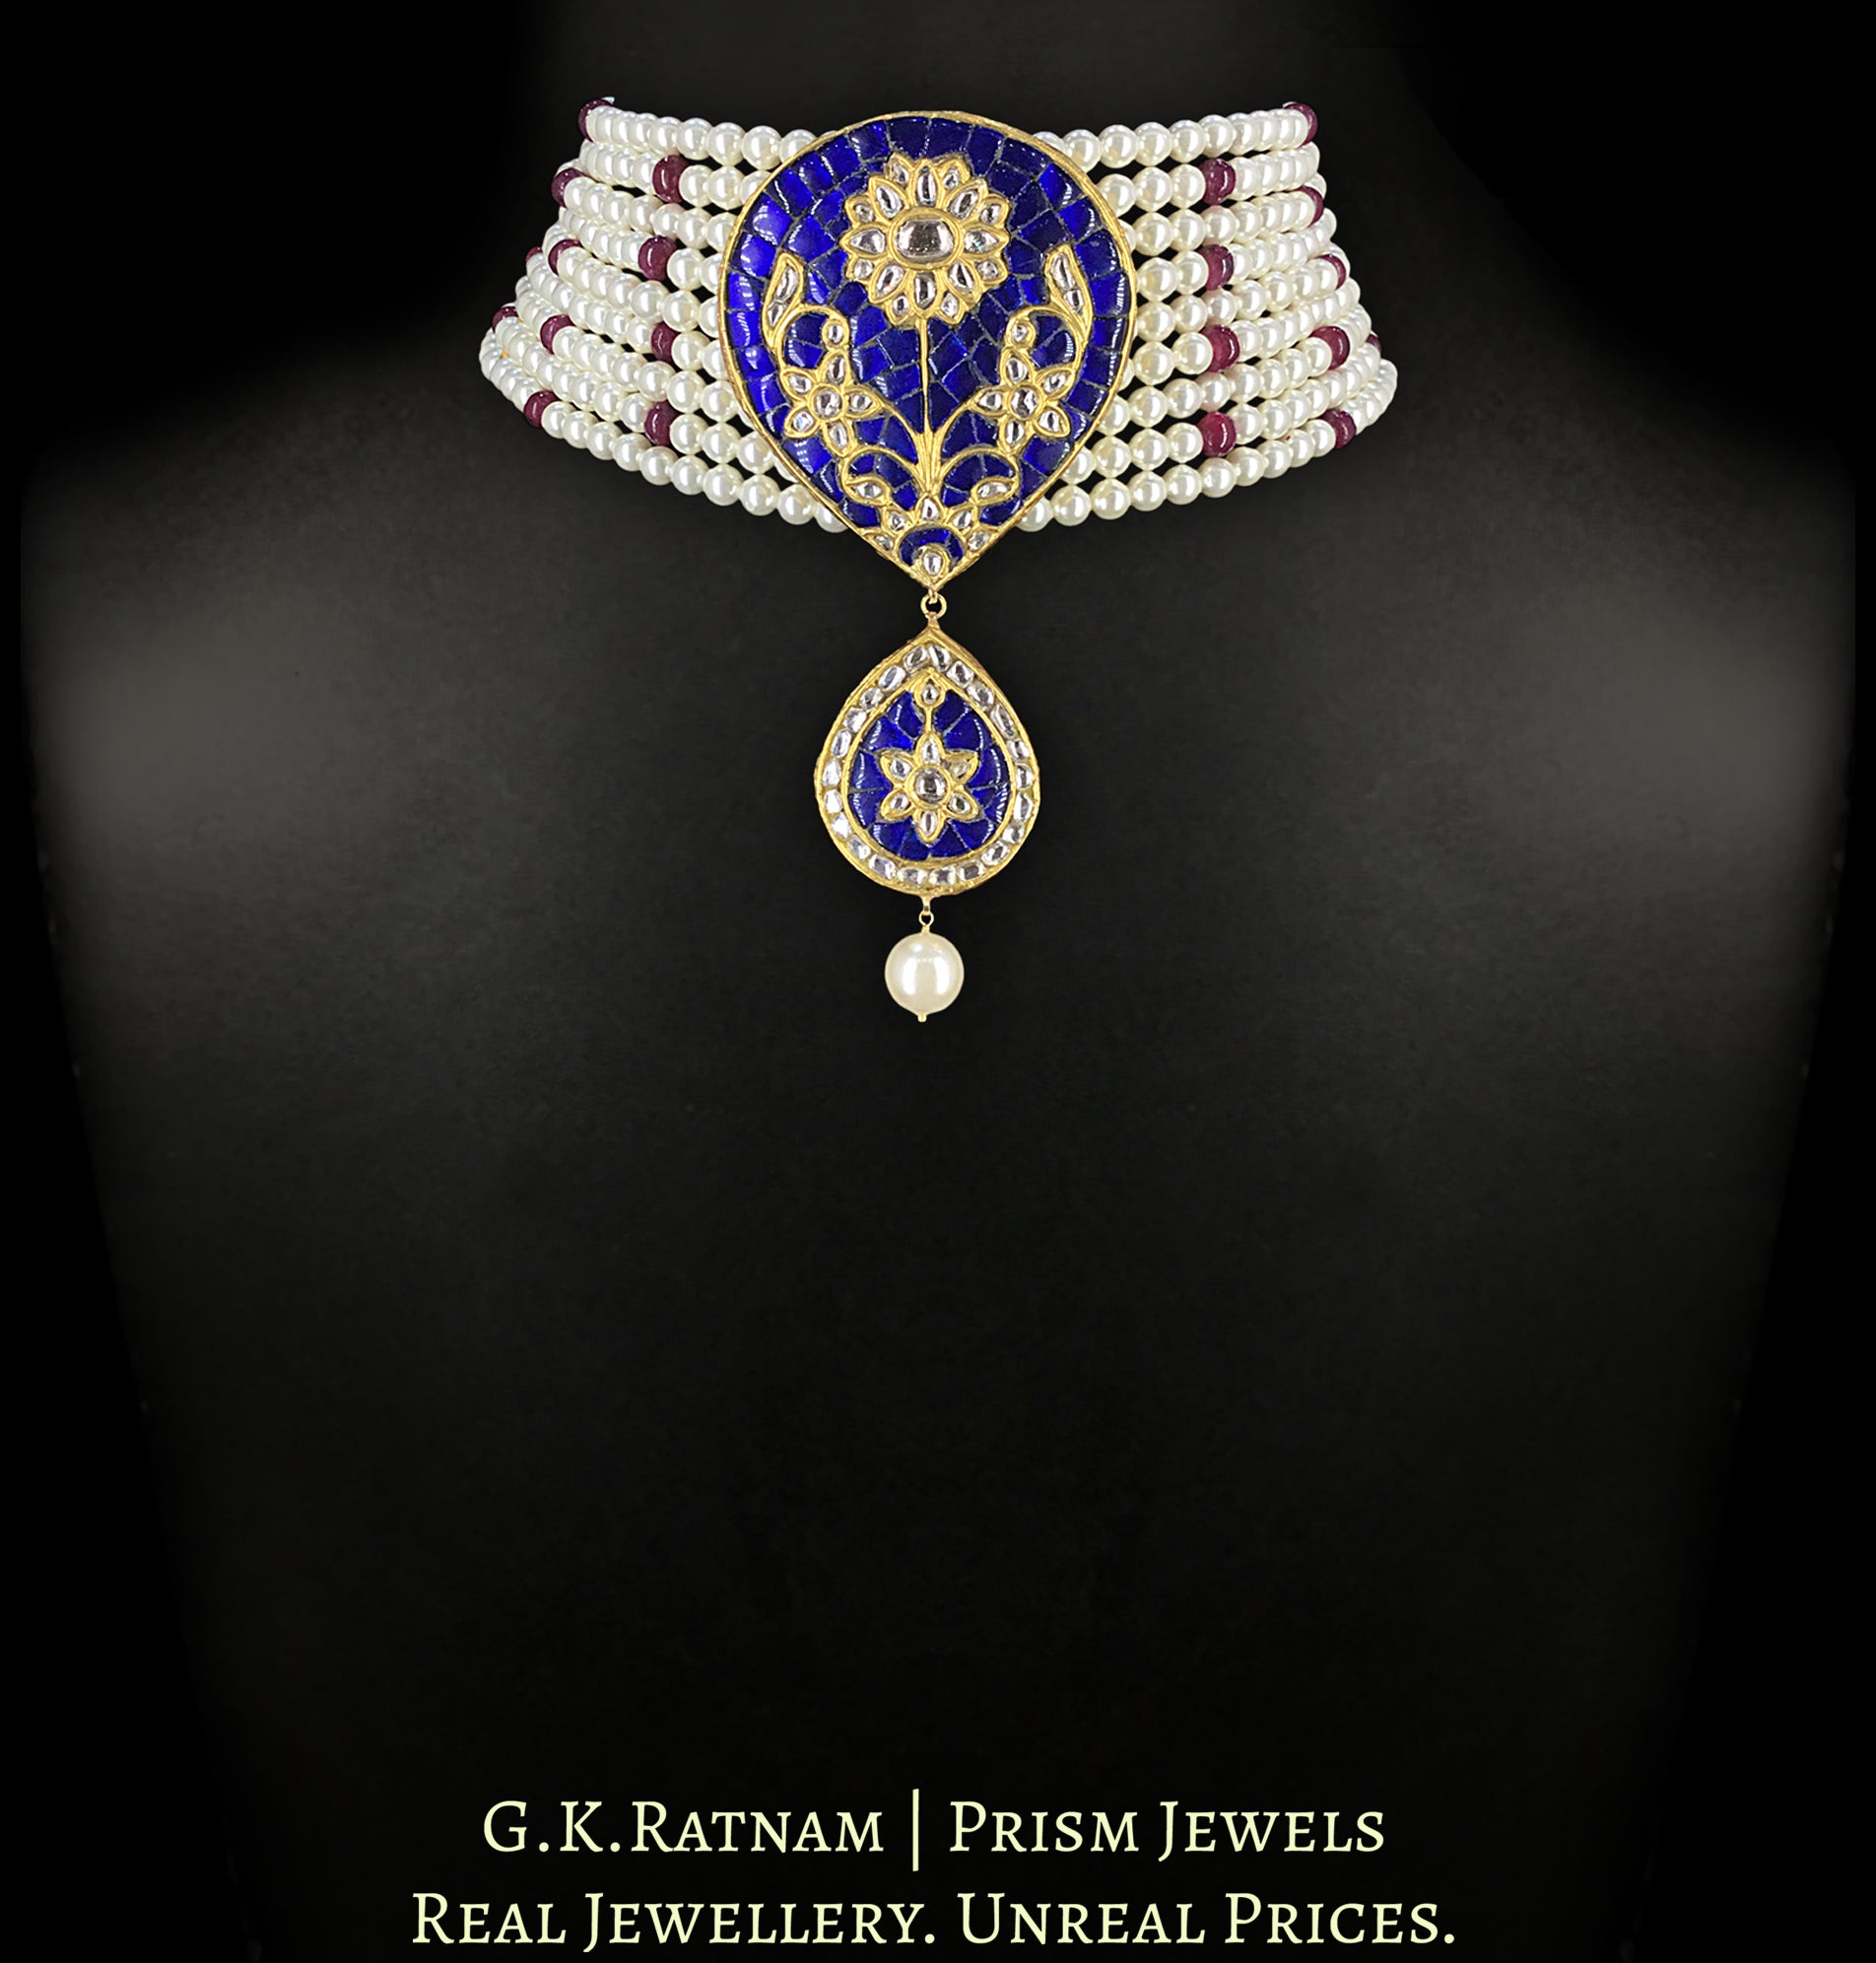 23k Gold and Diamond Polki Choker Necklace Set in Pearls and Rubies